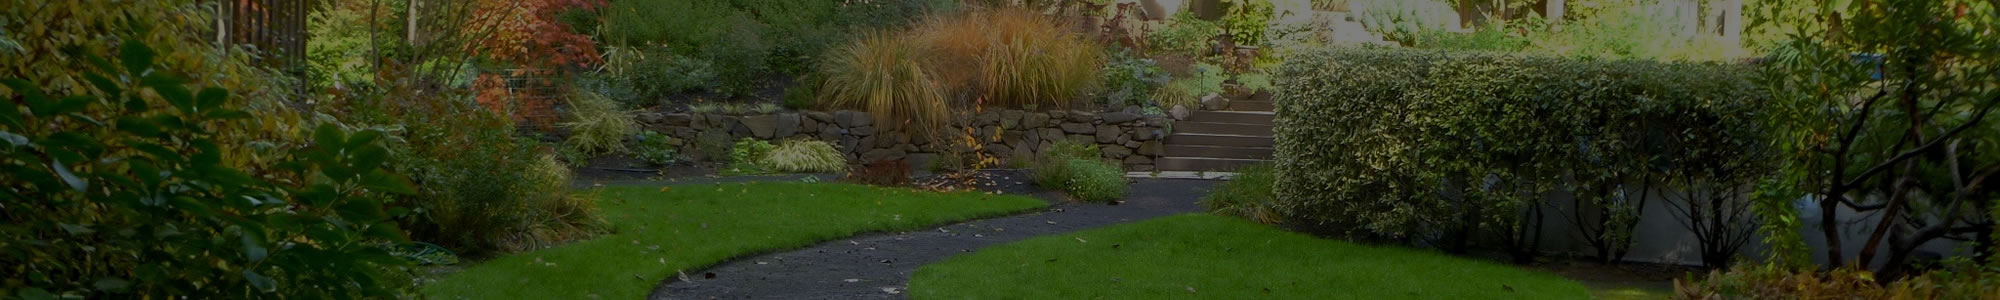 Landscape Design, Installation and Maintenance in Chester Springs PA